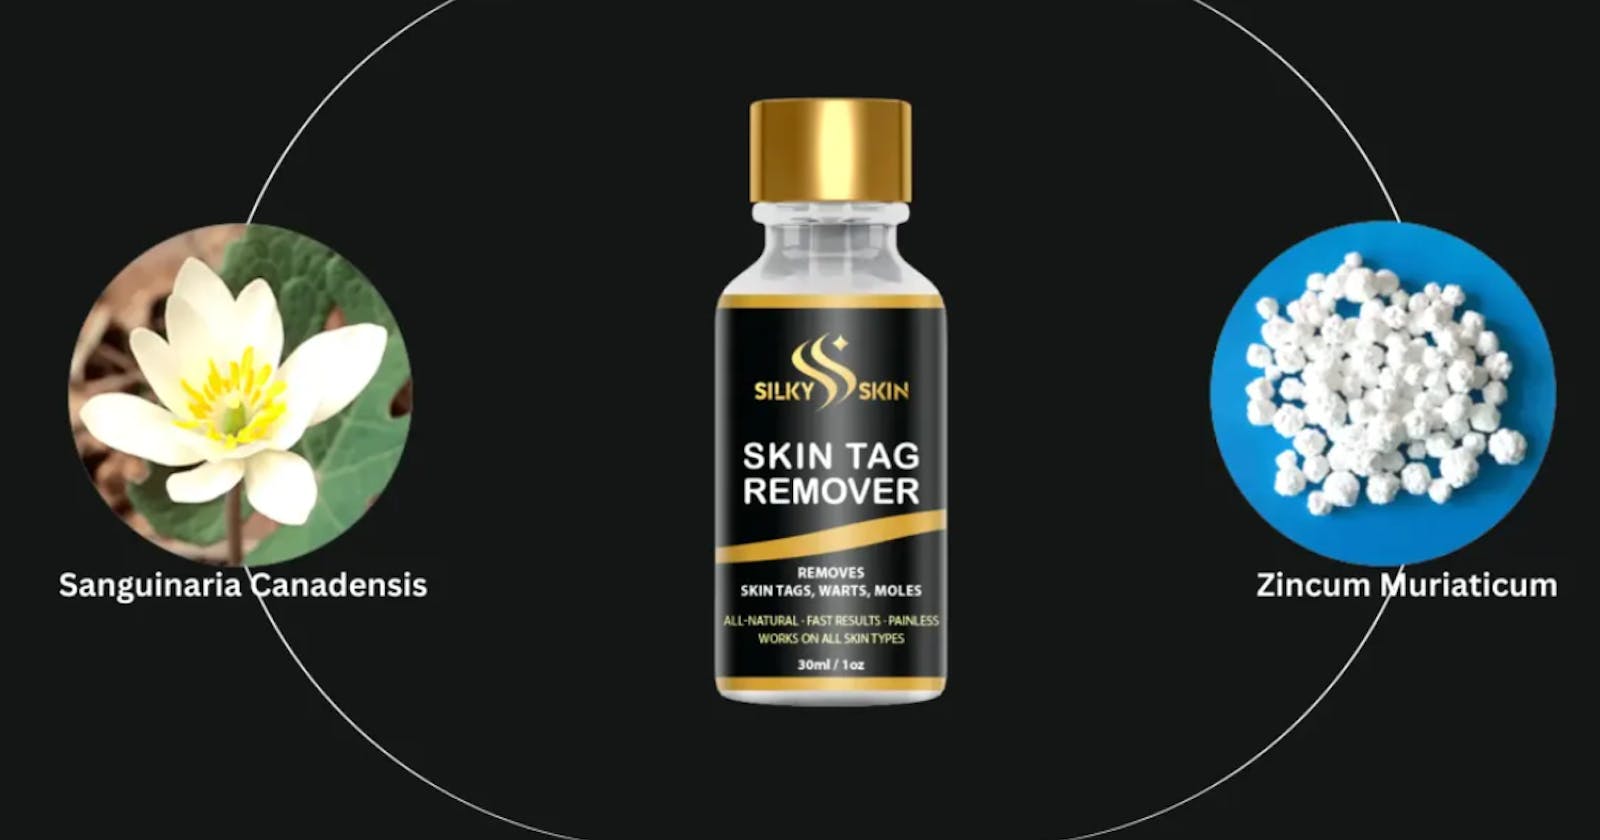 Silky Skin Tag Remover Canada: The New Way to Improve Your Skincare!